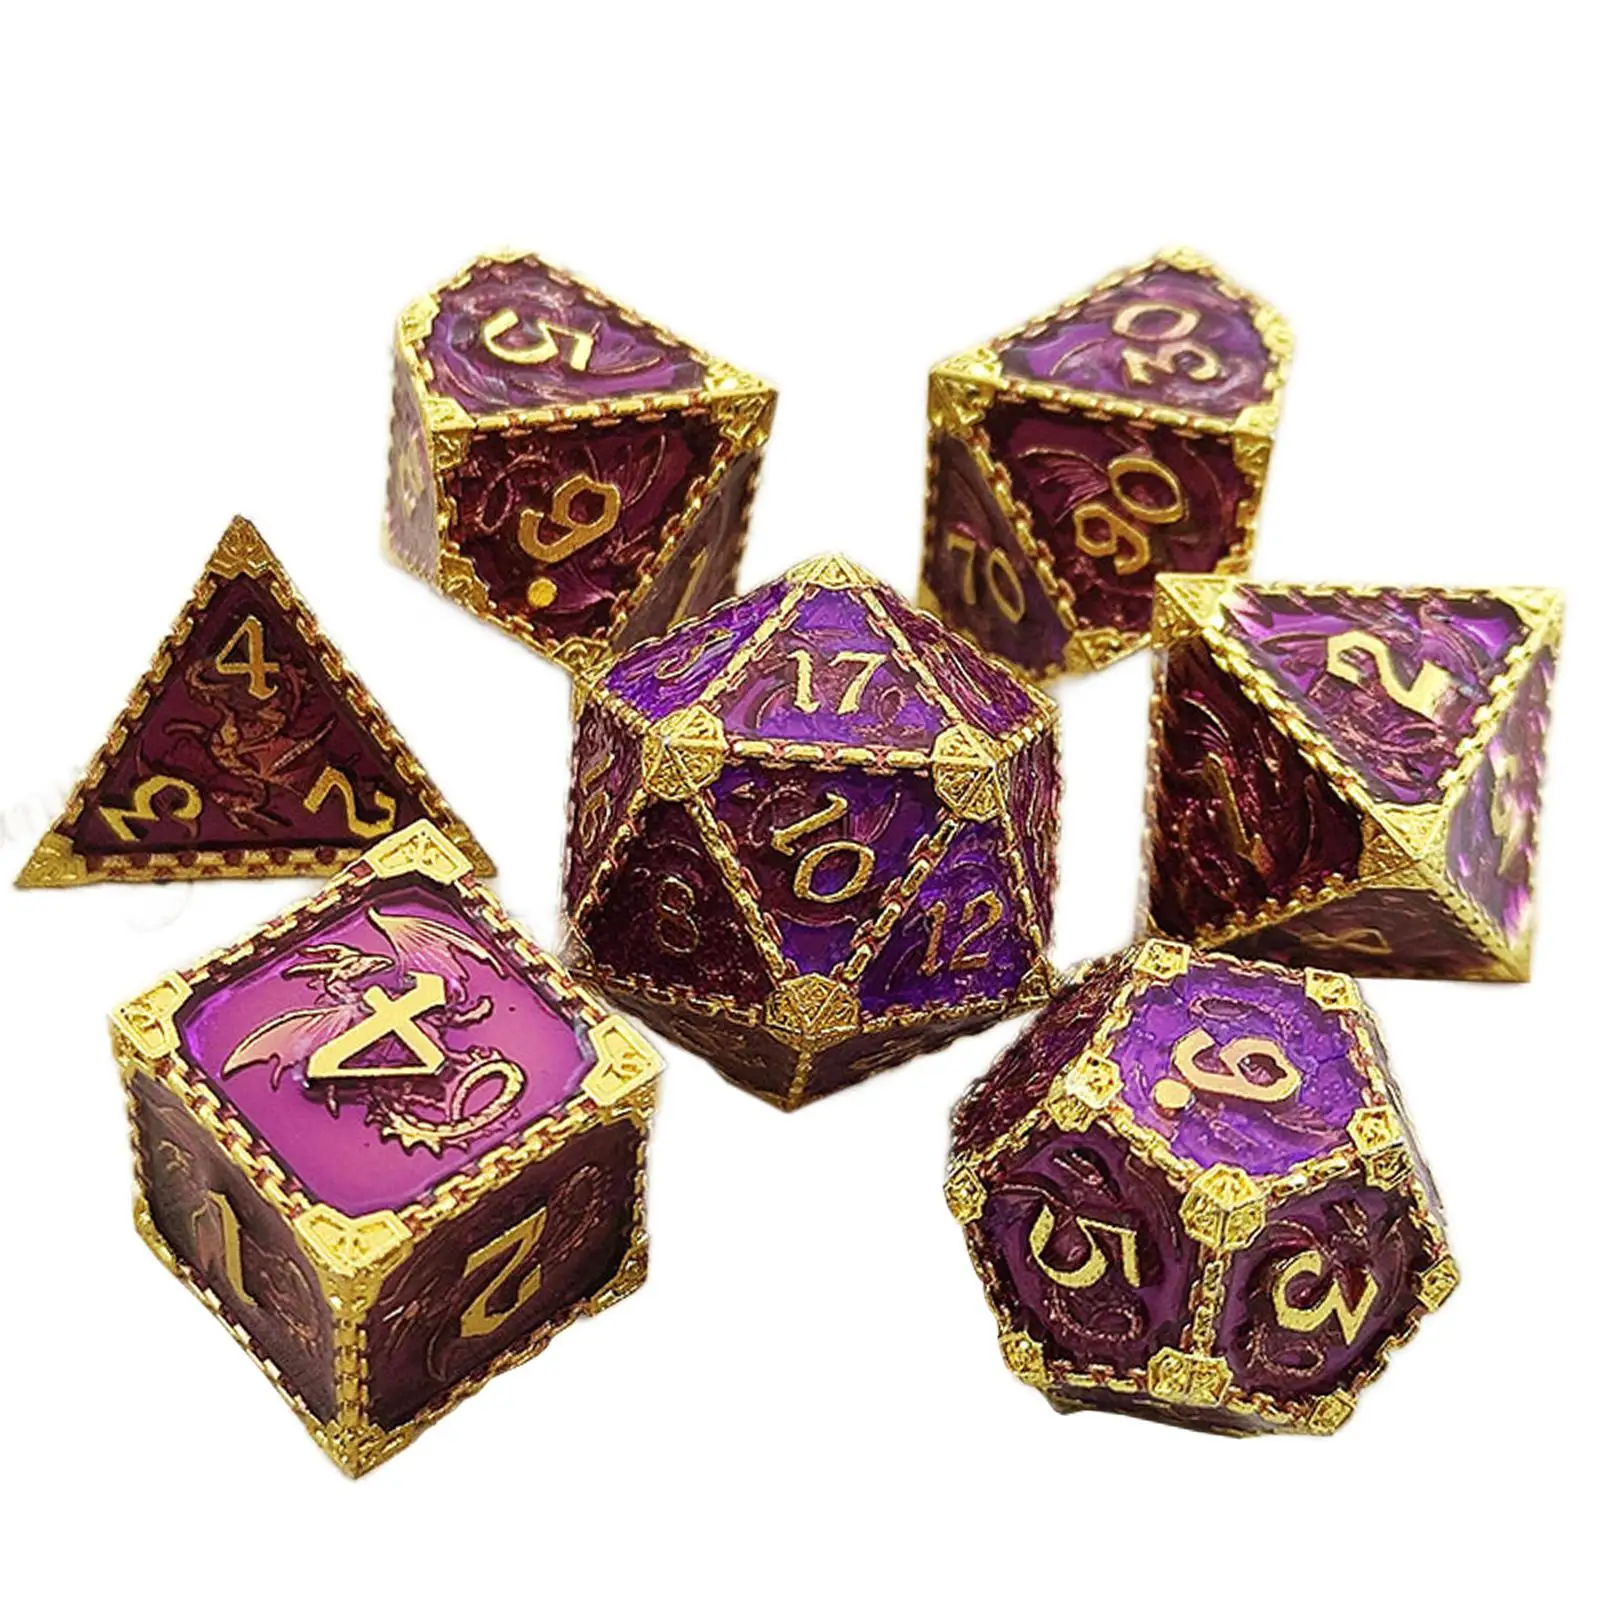 7 Pieces Polyhedral Dice Multi-Sided Props Board Games Party Favors RPG Dices Party Supply Role Playing Dice for DND RPG MTG